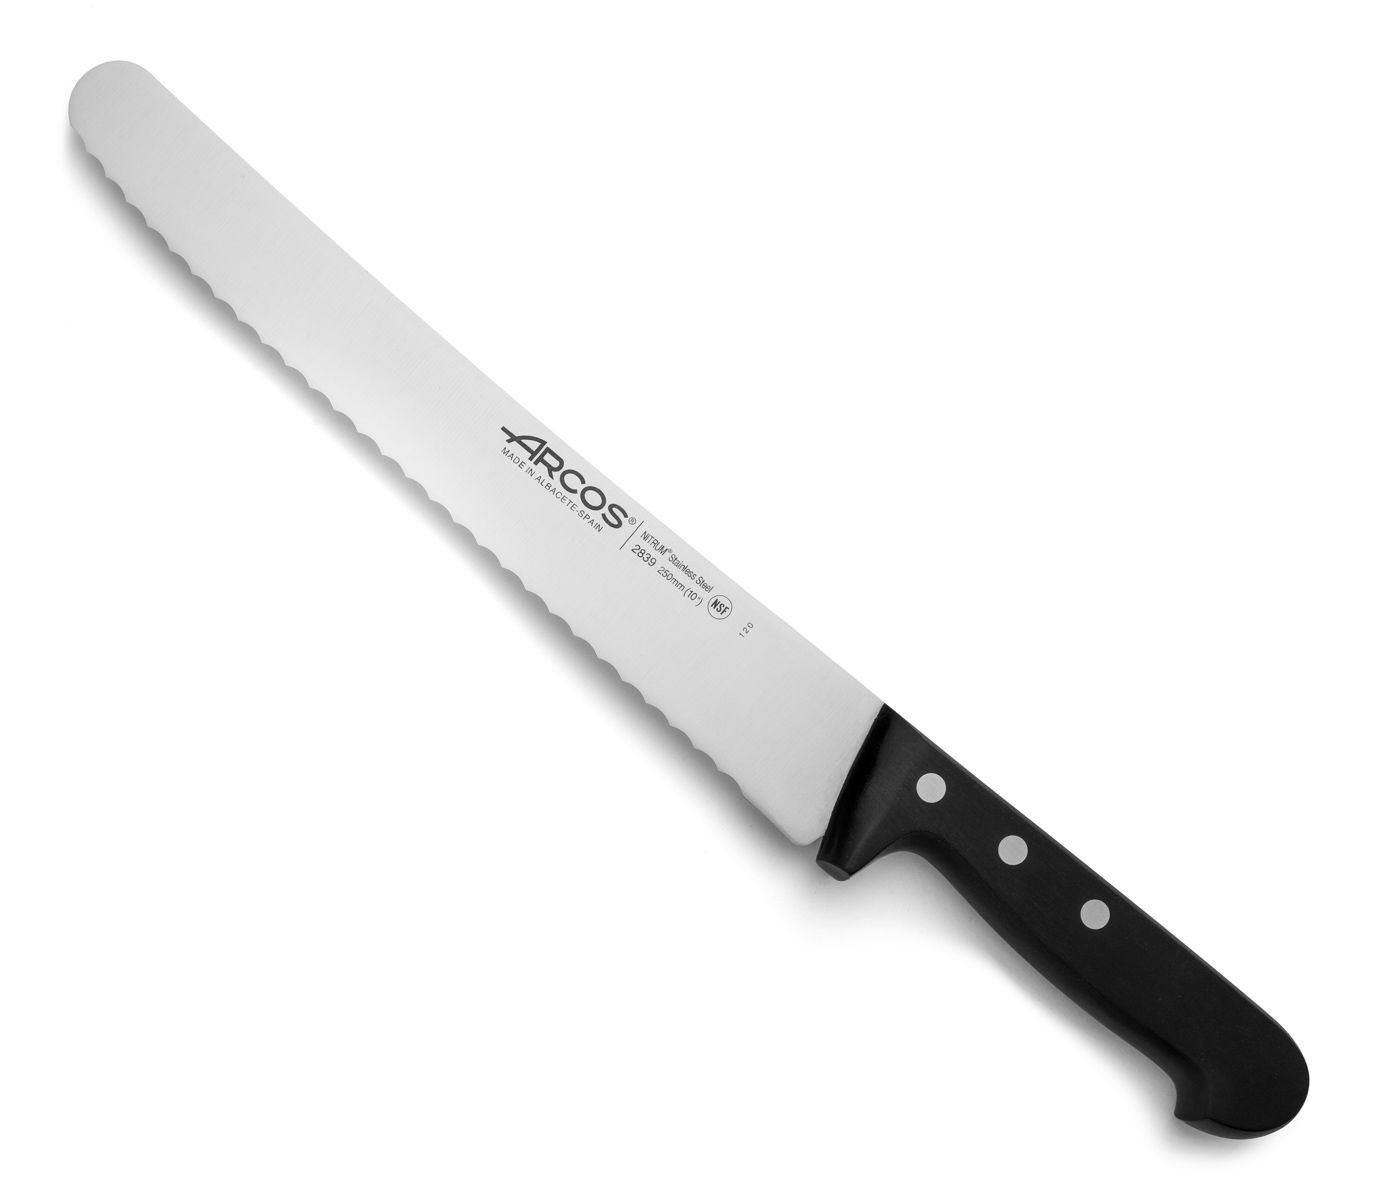 Cutit profesional, Pastry Knife, lungime 25cm, Arcos